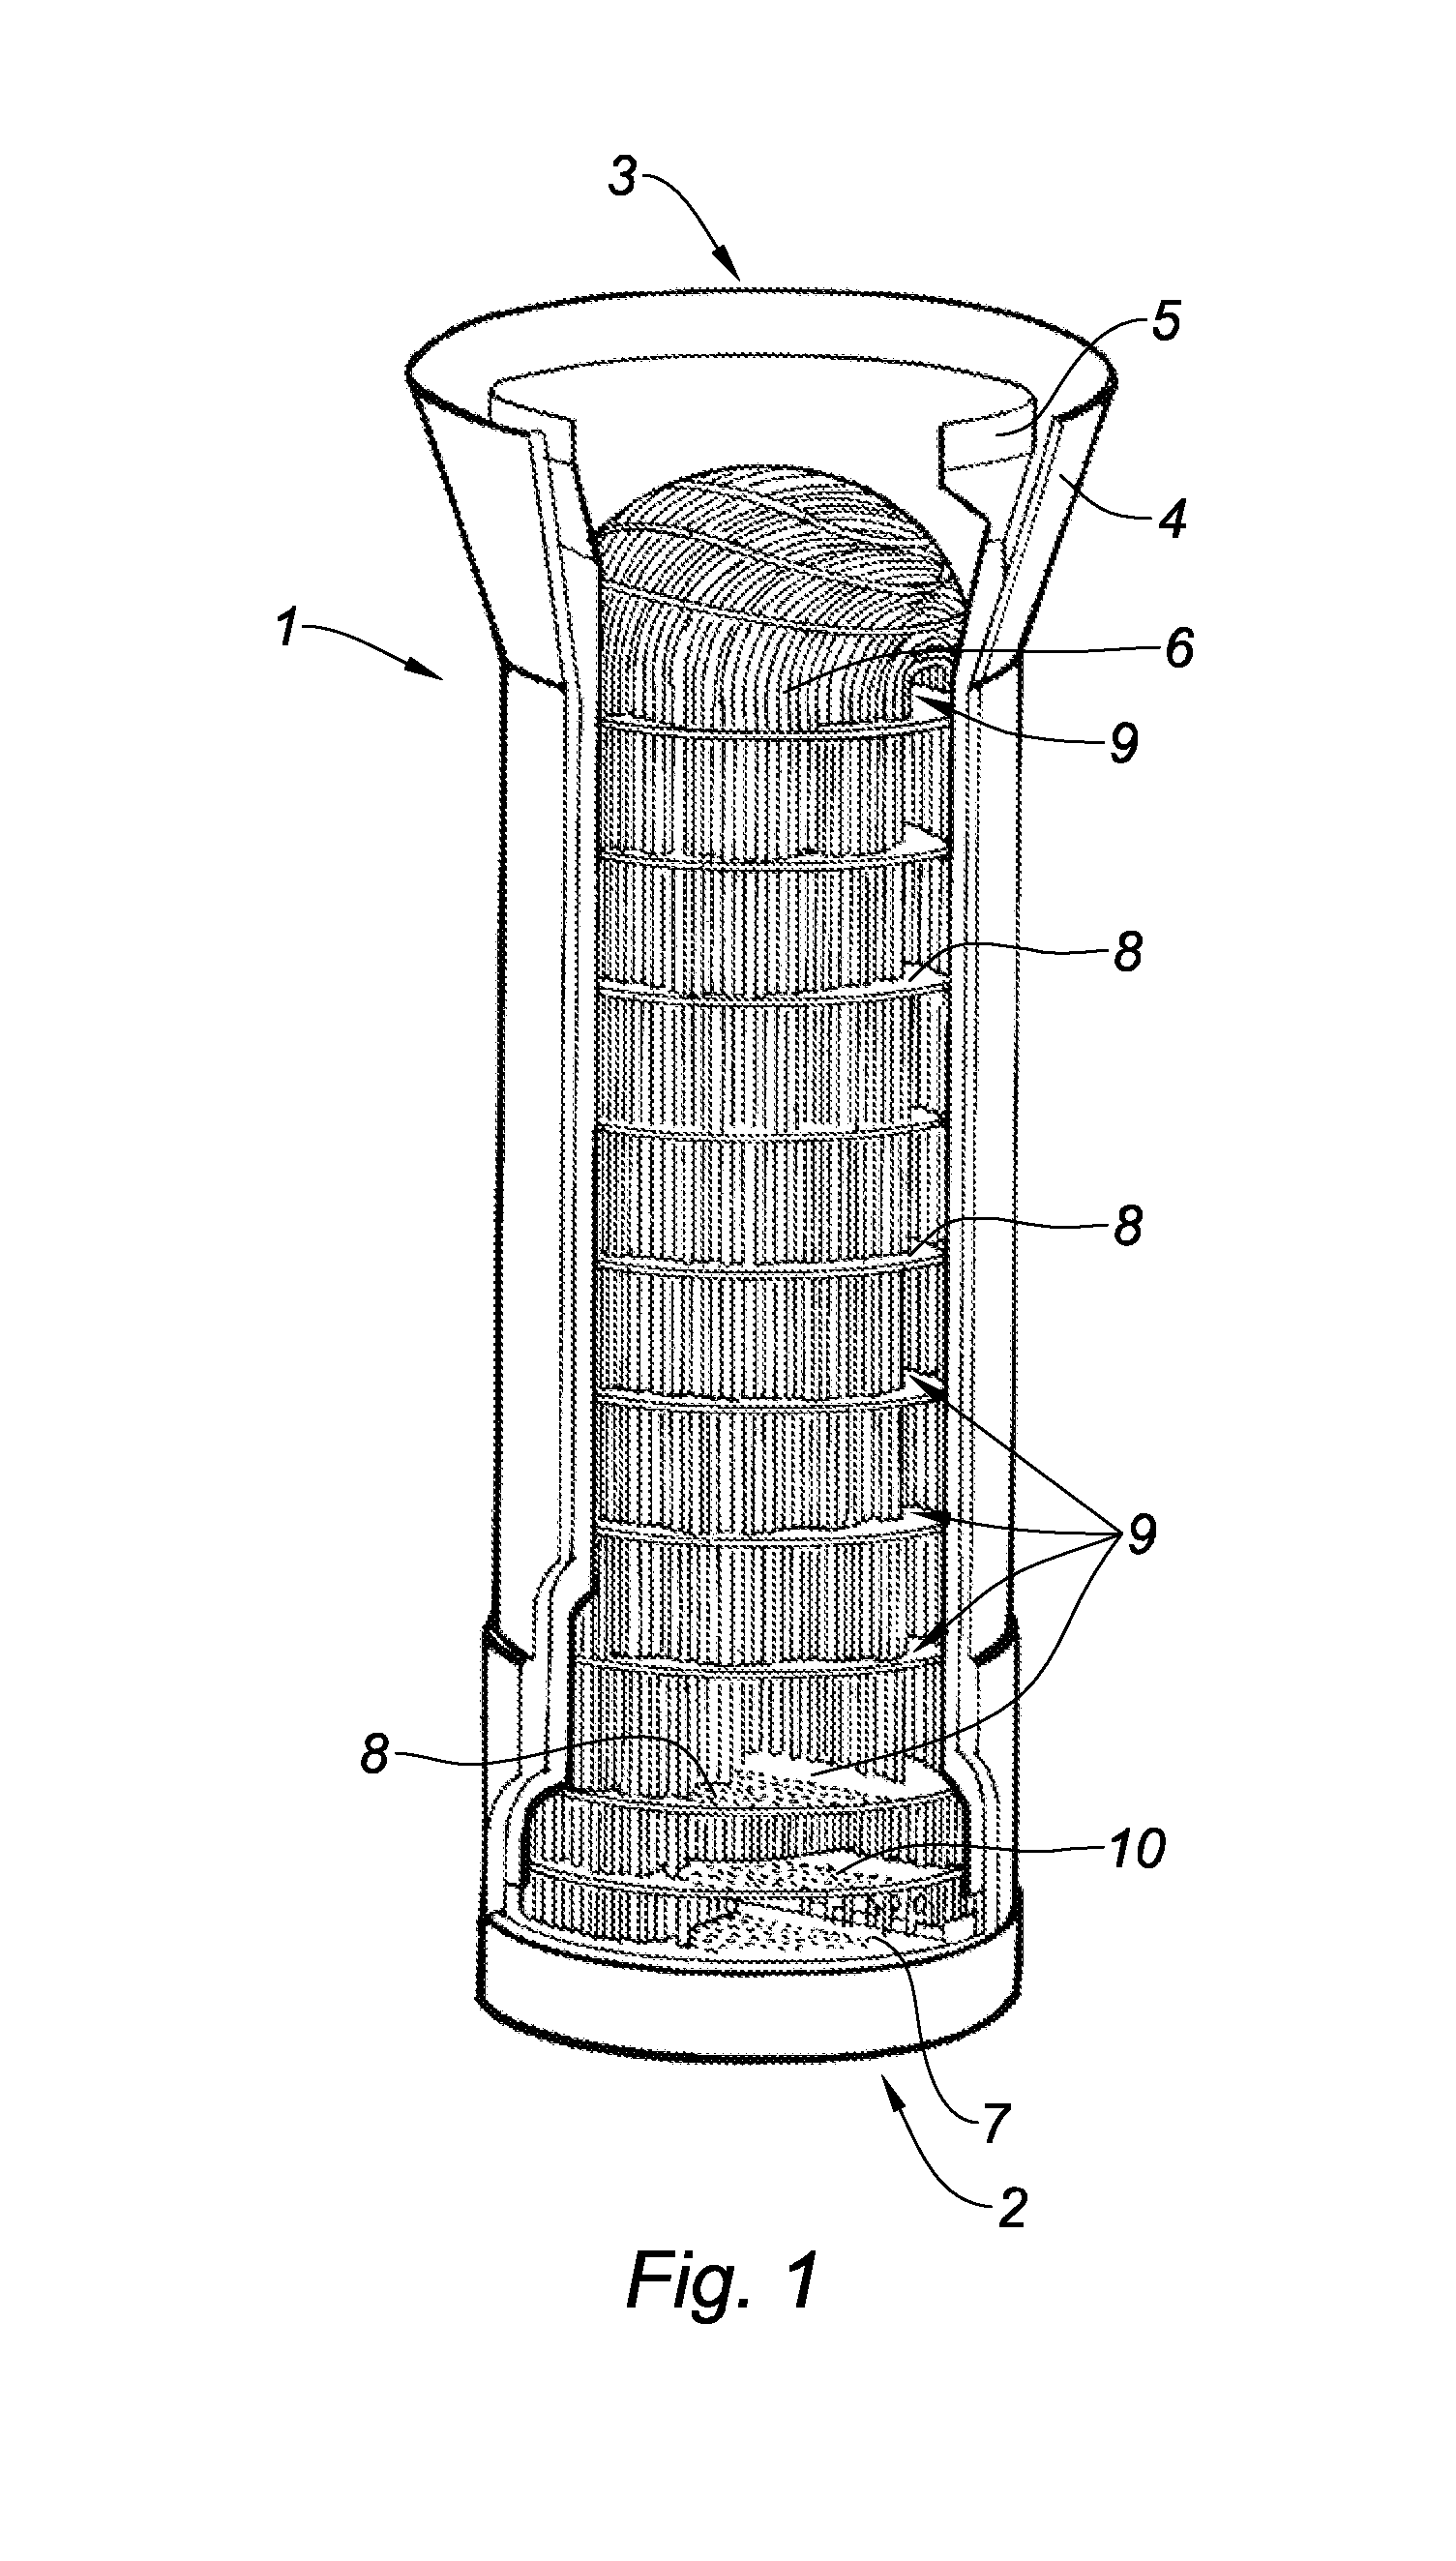 Device for inspecting a steam generator